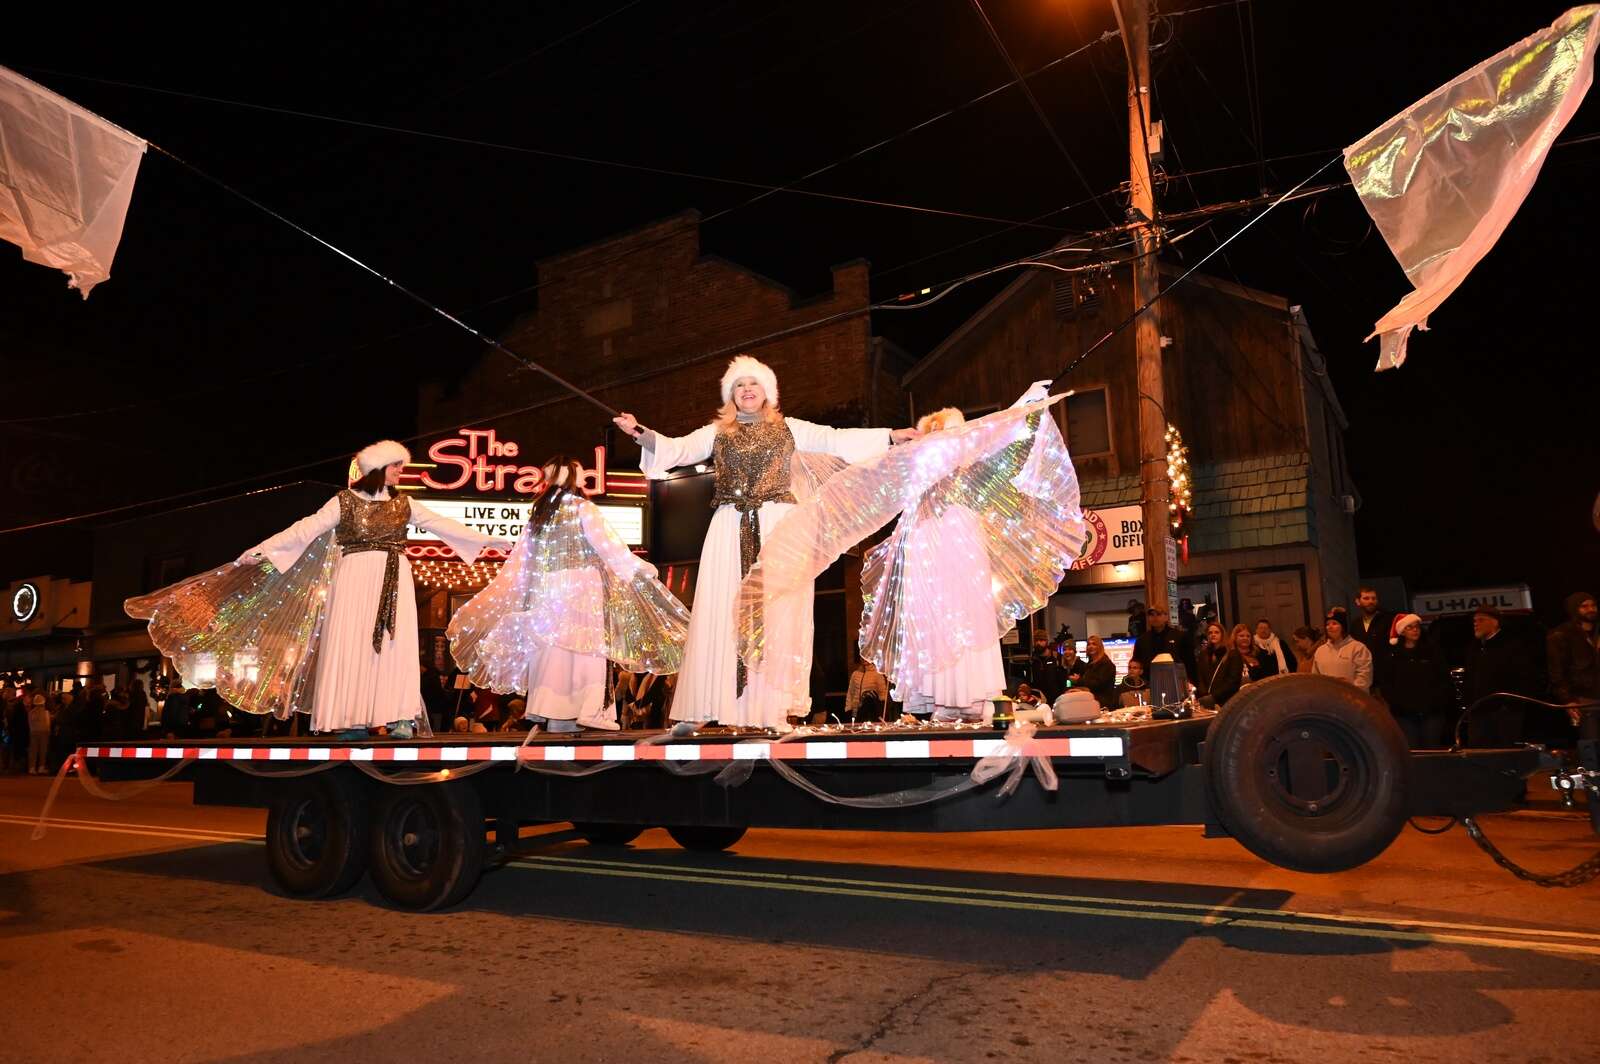 Event organizer Carol Ziegler on her float at the Miracle on Main parade